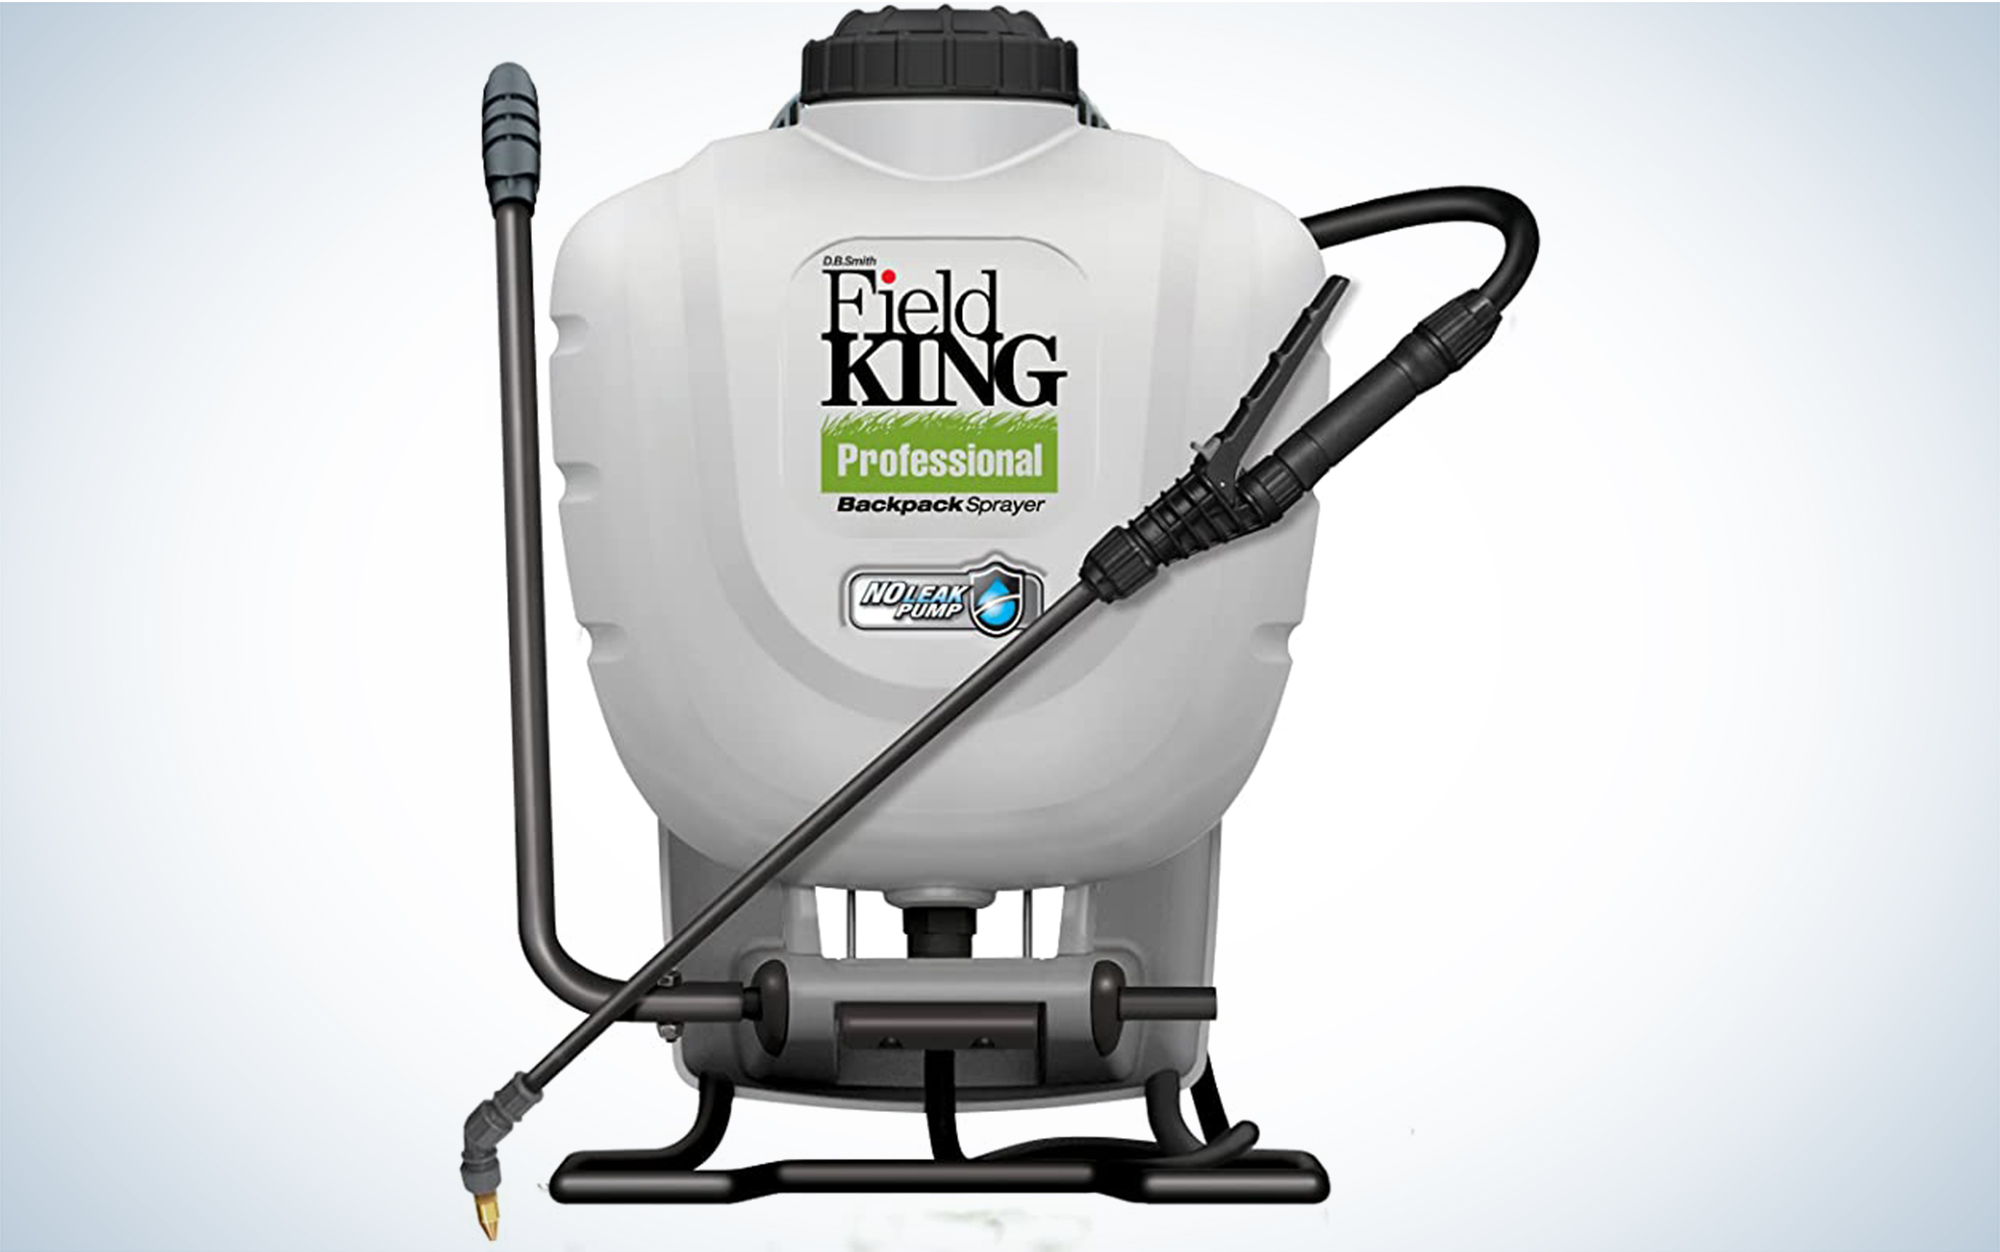 The Field King 4-Gallon 190328 Sprayer is the best budget backpack sprayer.